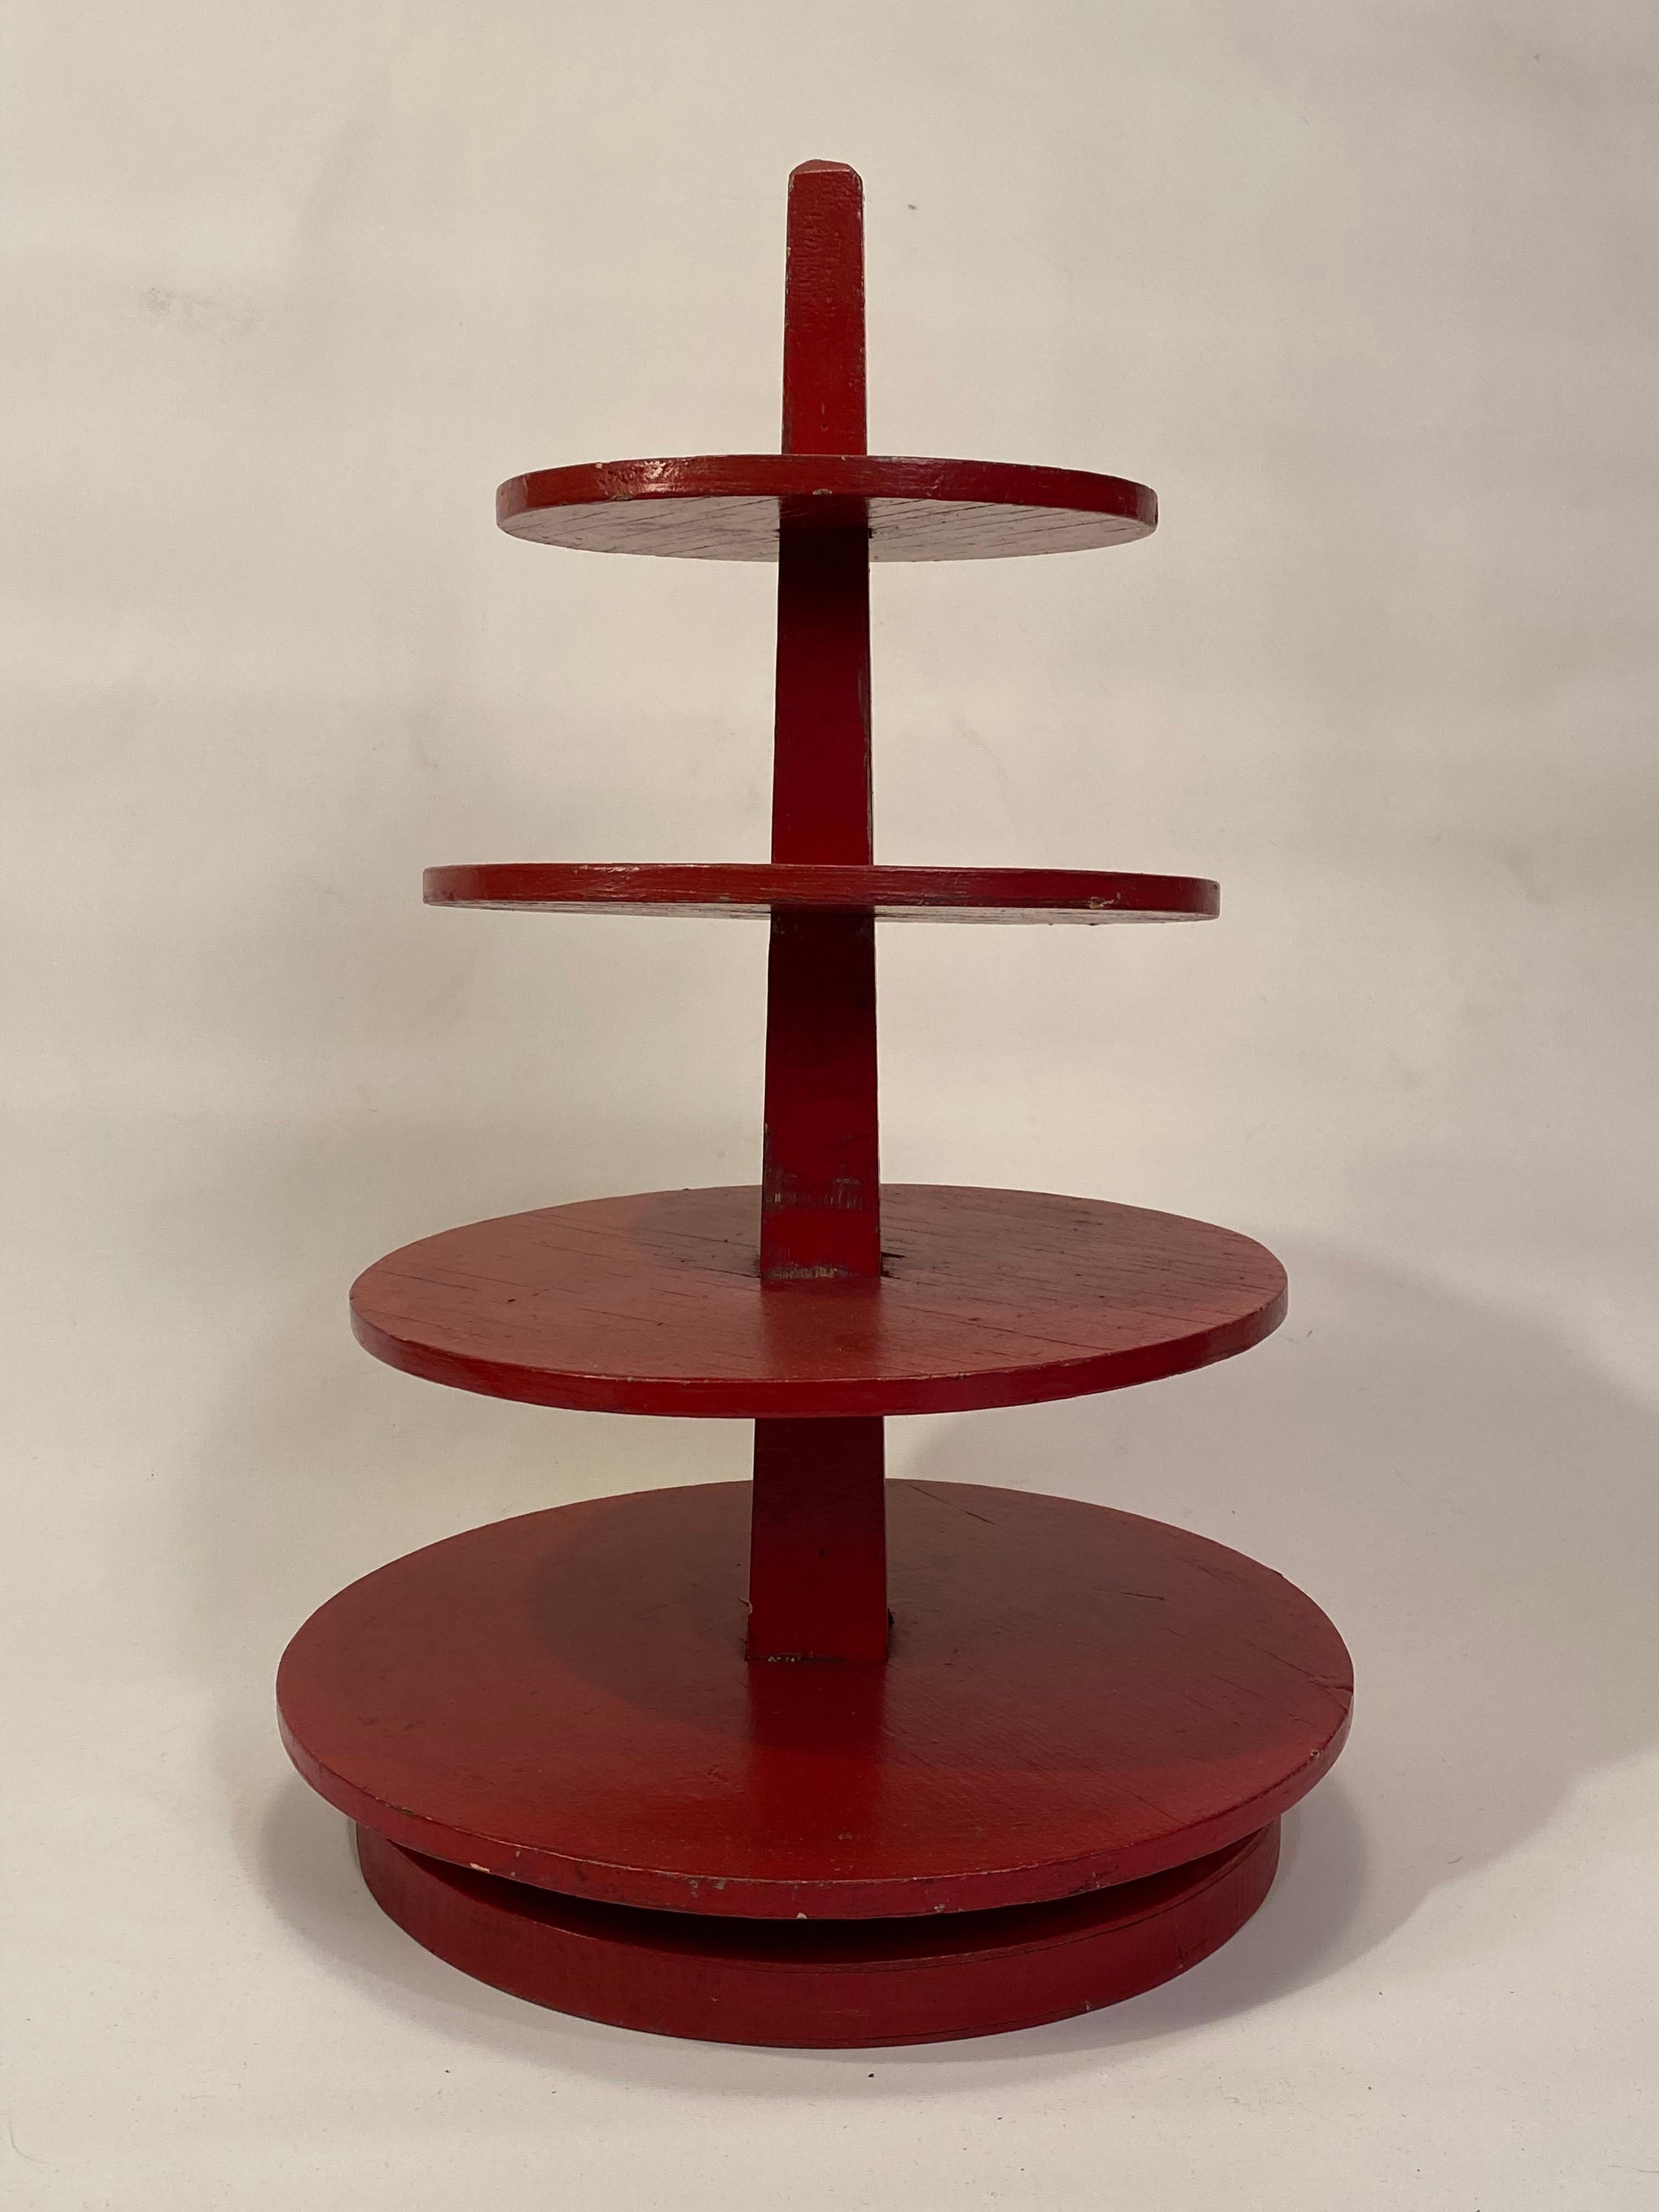 Charming red enamel painted tiered plywood display stand. A wonderful way to display your collectibles and curios. Comprised of four round tiered plywood shelves that rest snuggly around a center post (it does not rotate). There is no glue so one or